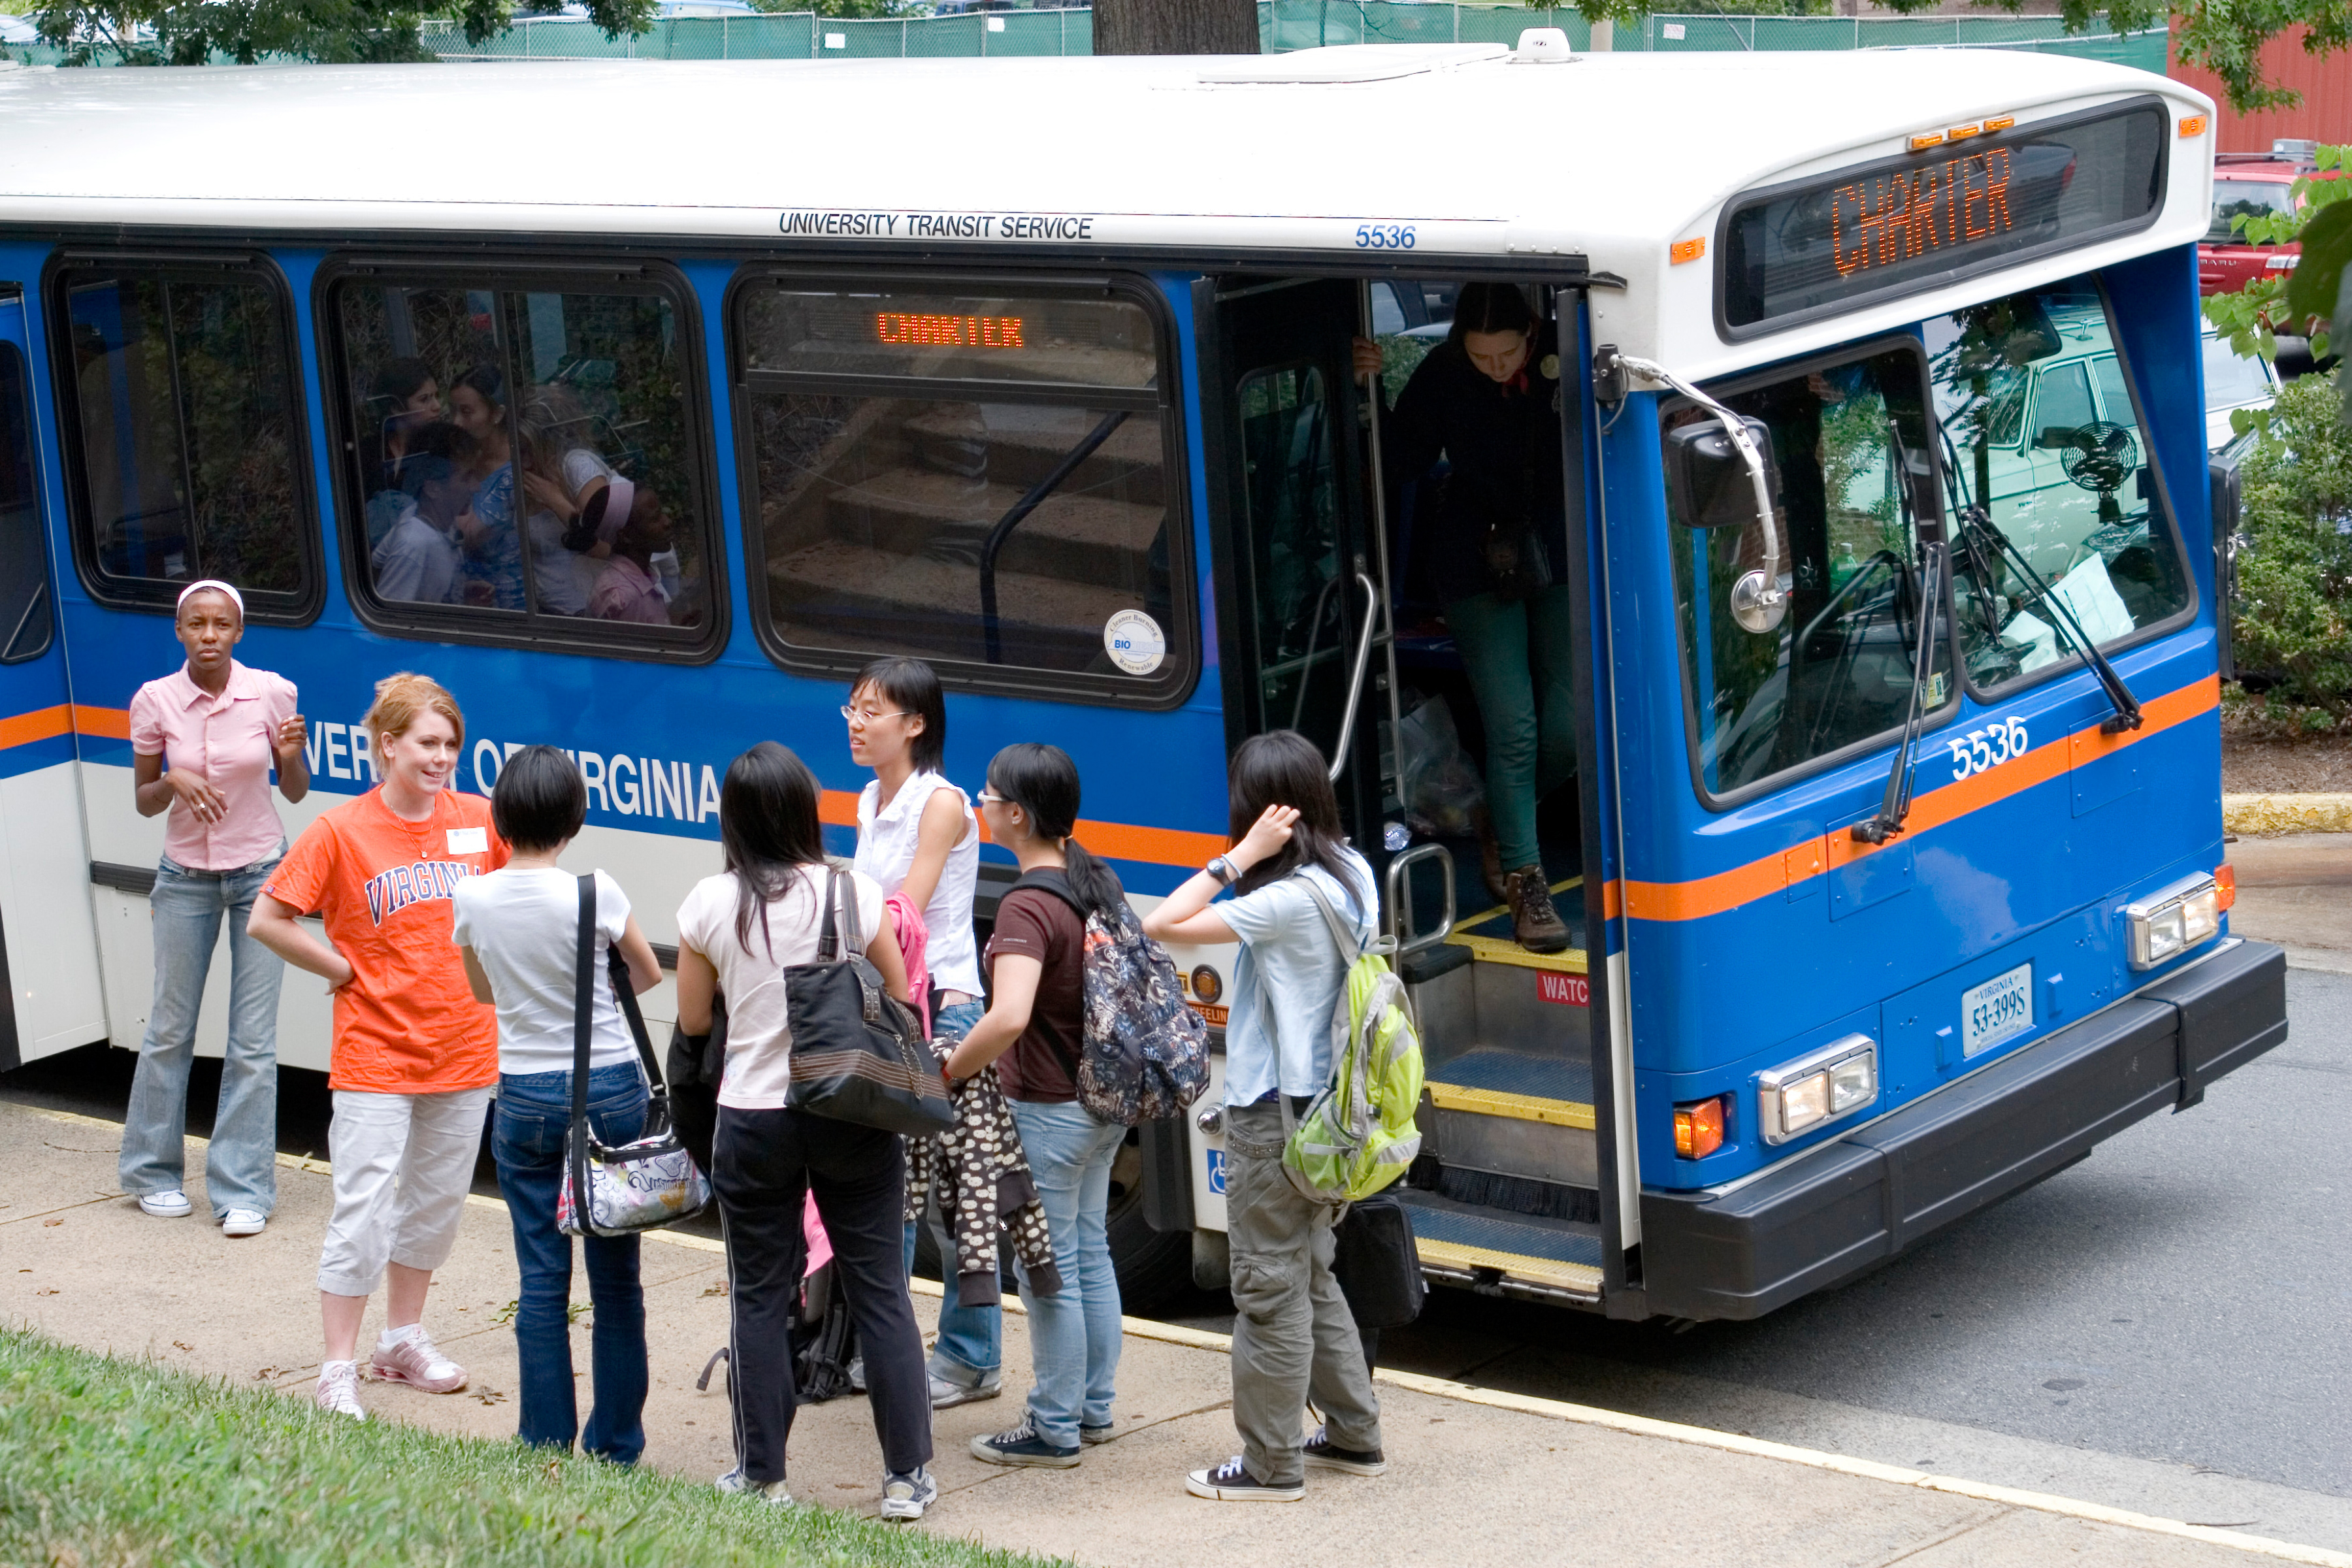 Students stand beside of a UVA bus on the sidewalk